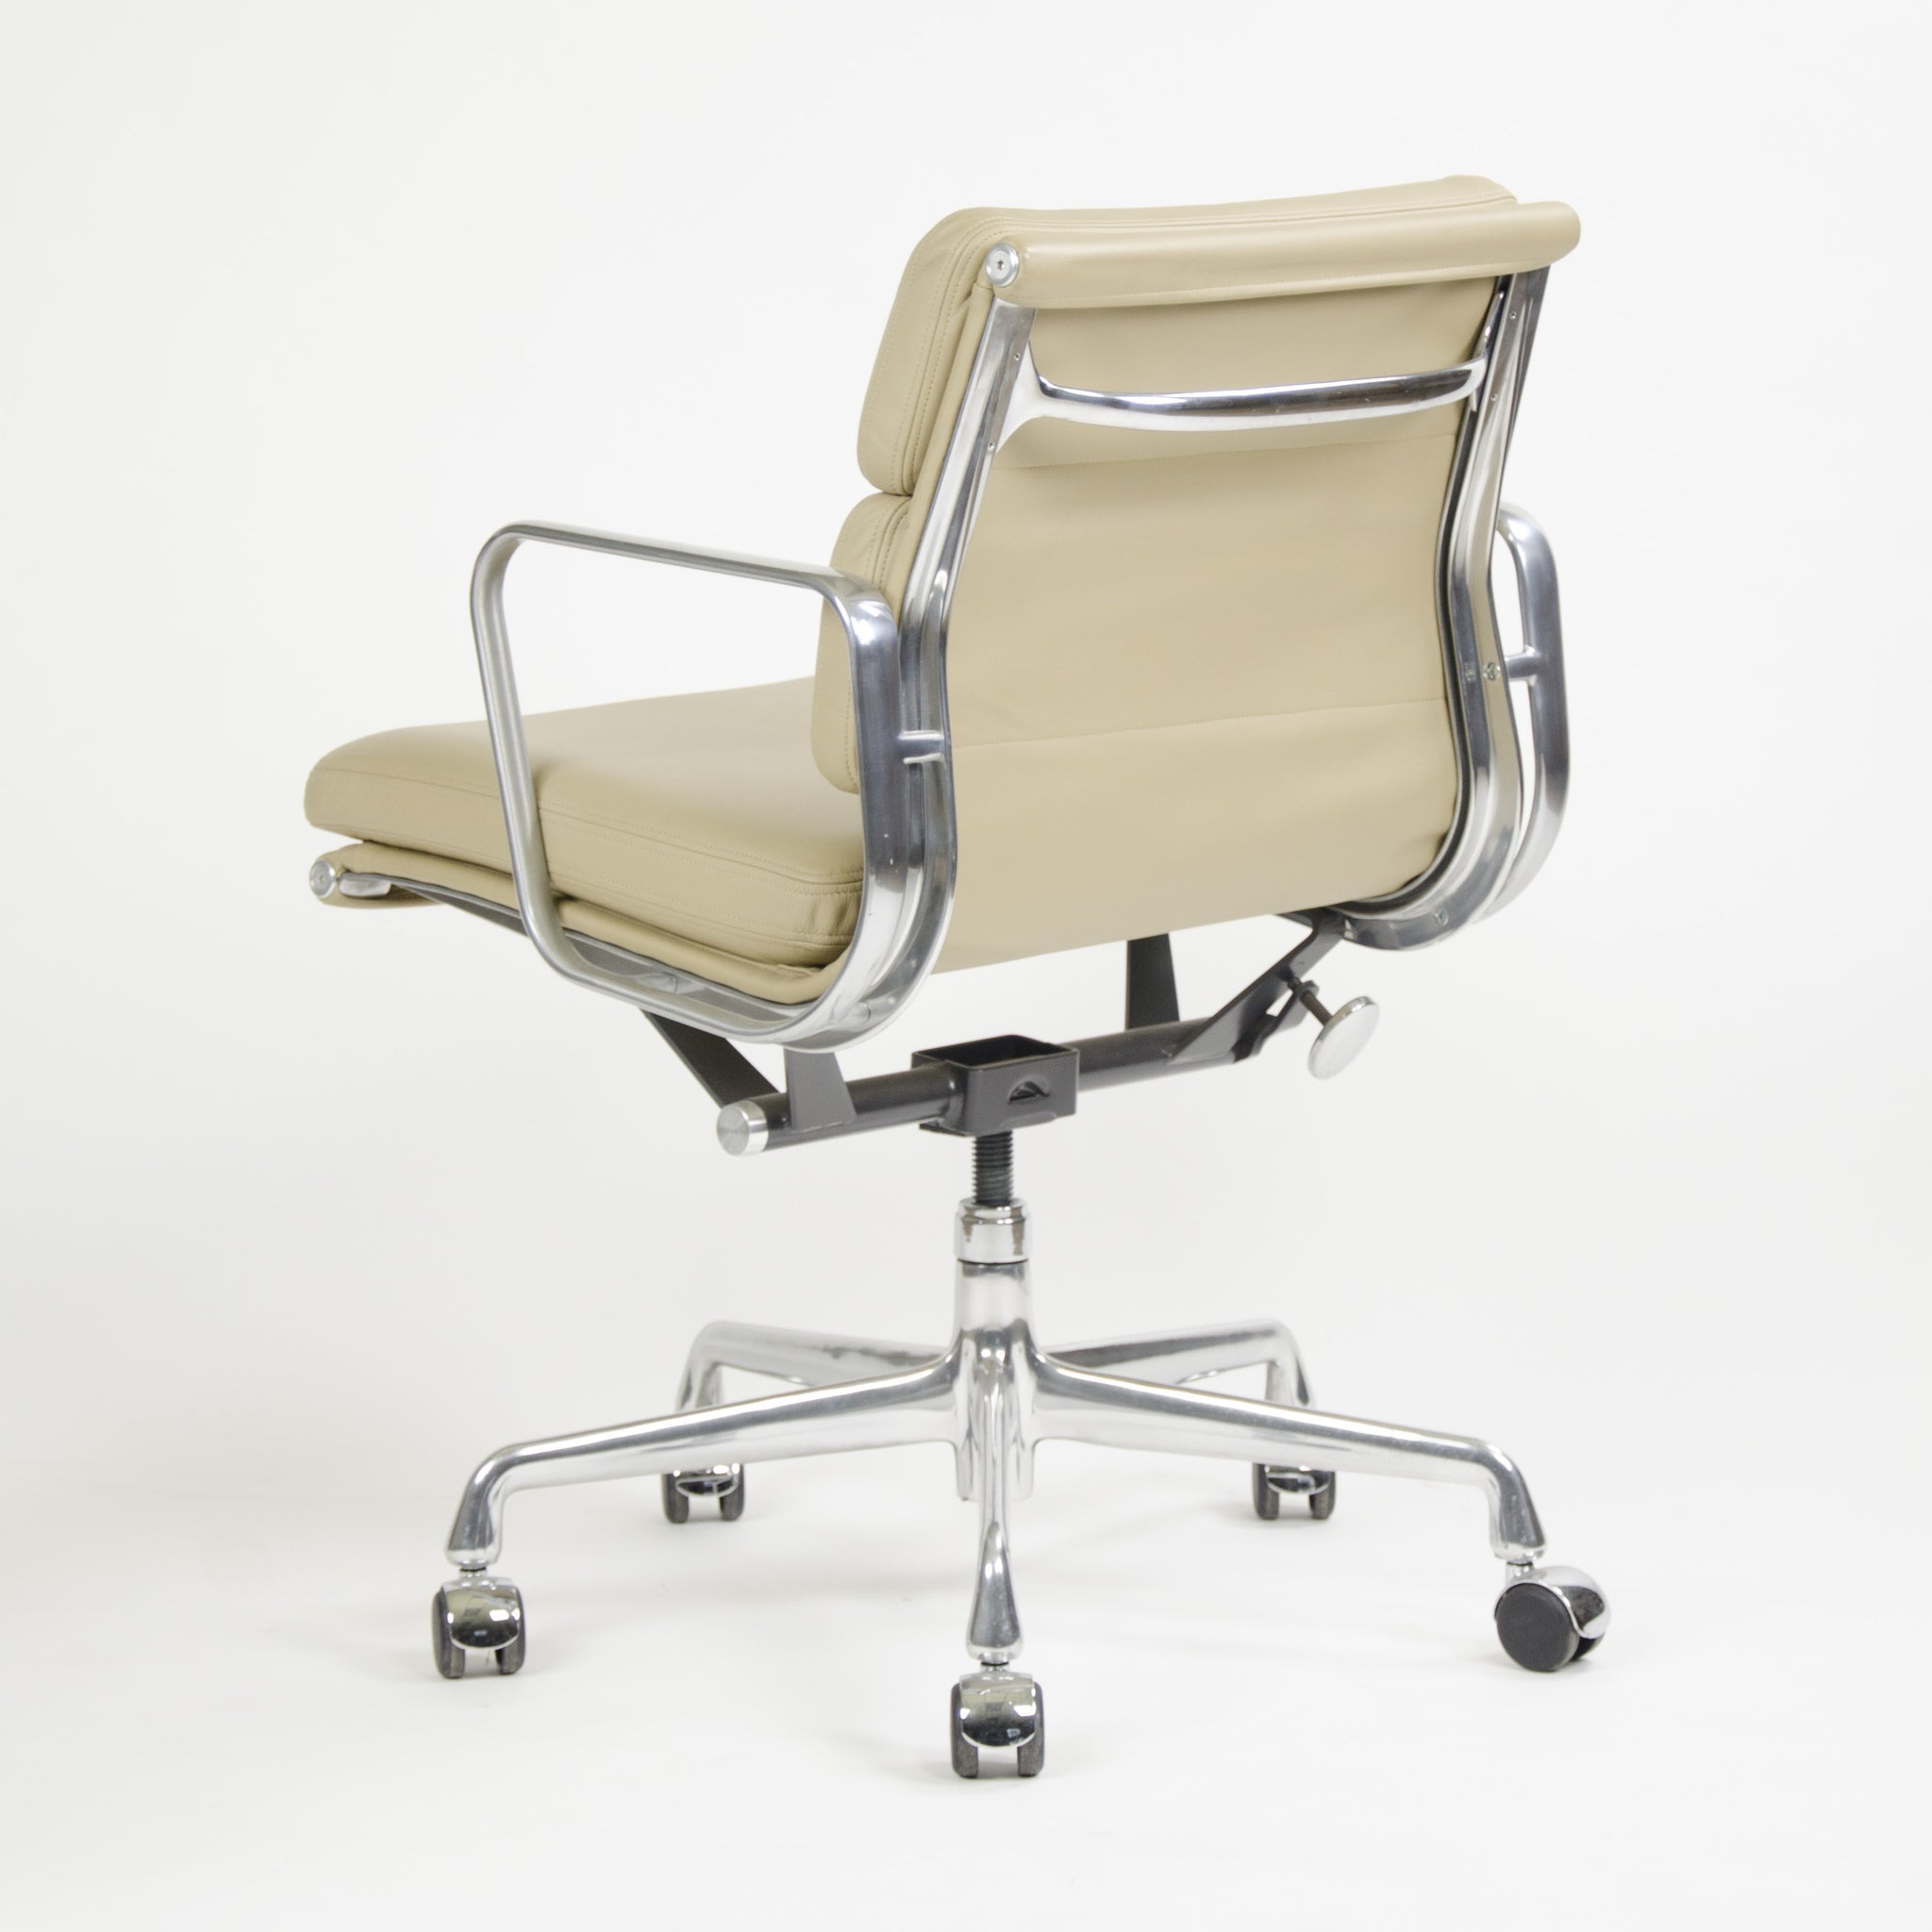 SOLD Herman Miller Eames Soft Pad Aluminum Group Chair Tan Leather MINT 2007 2x Avail